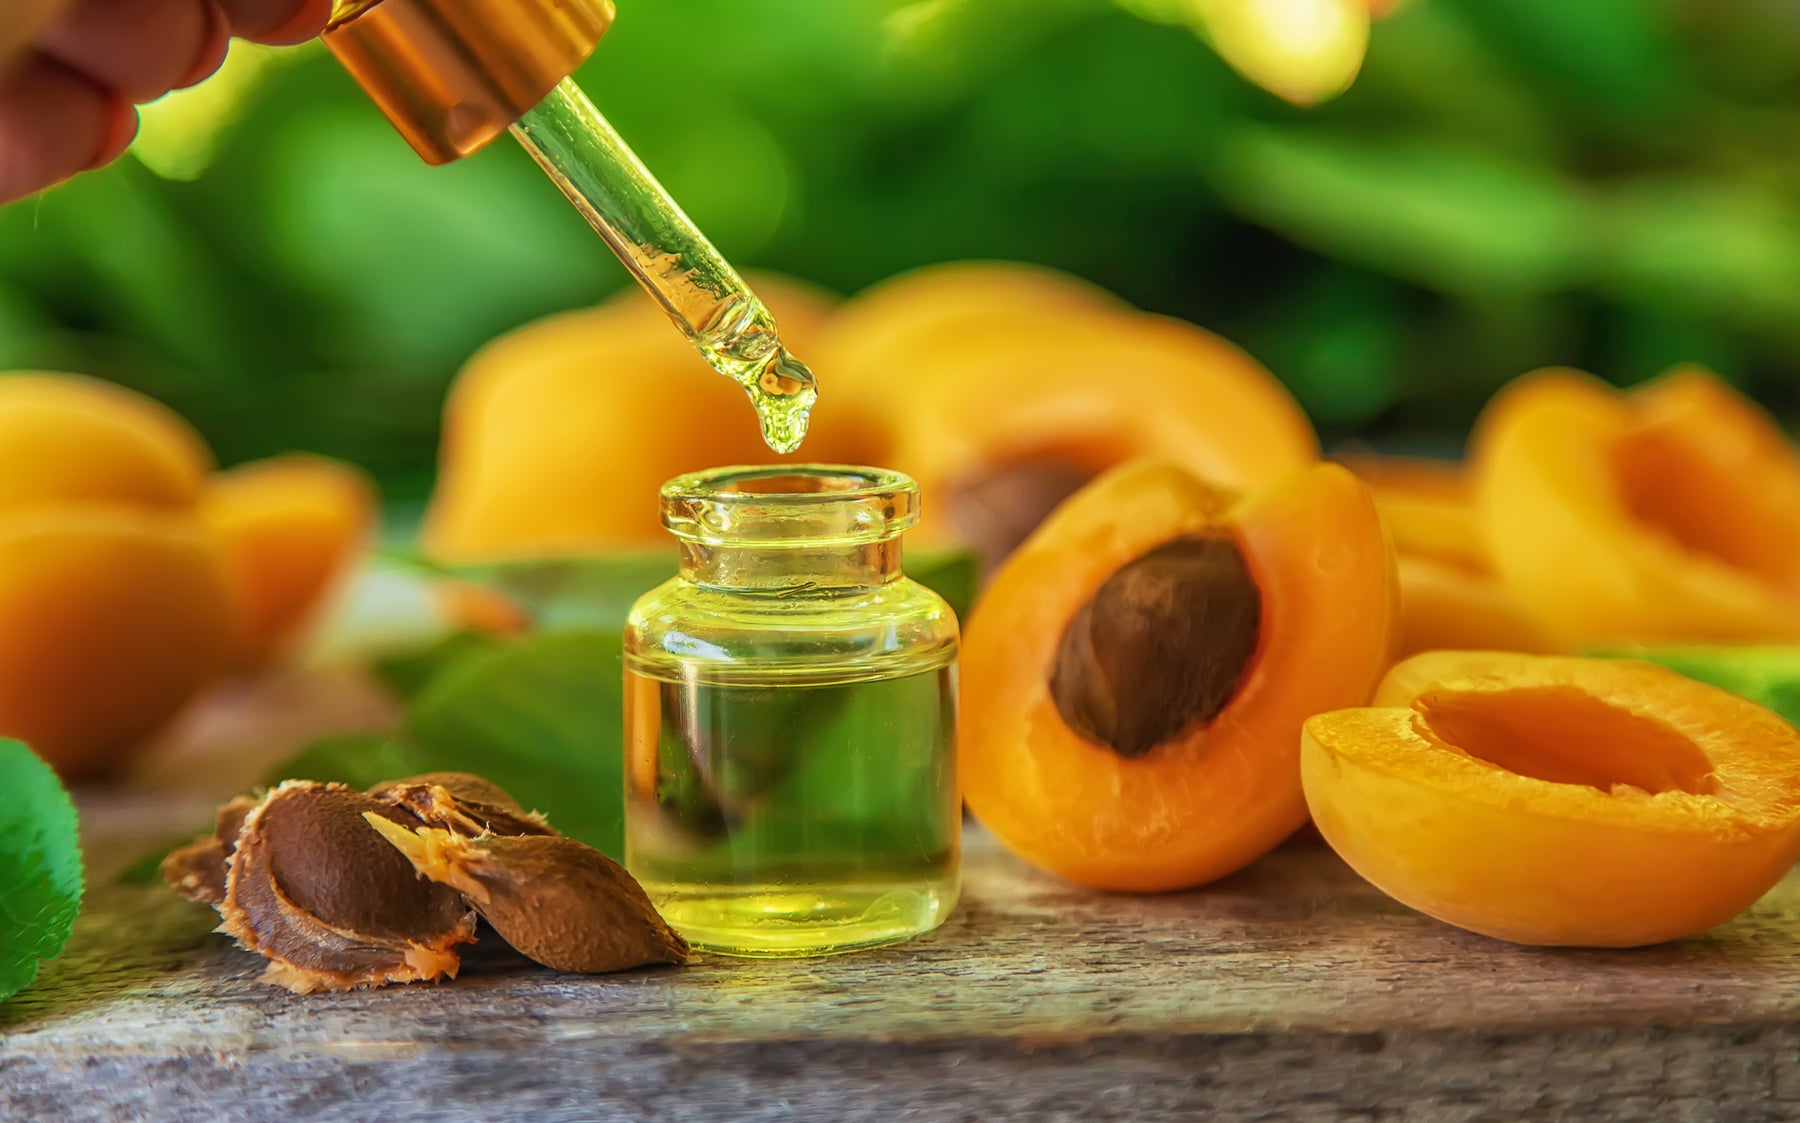 Benefits of apricot oil